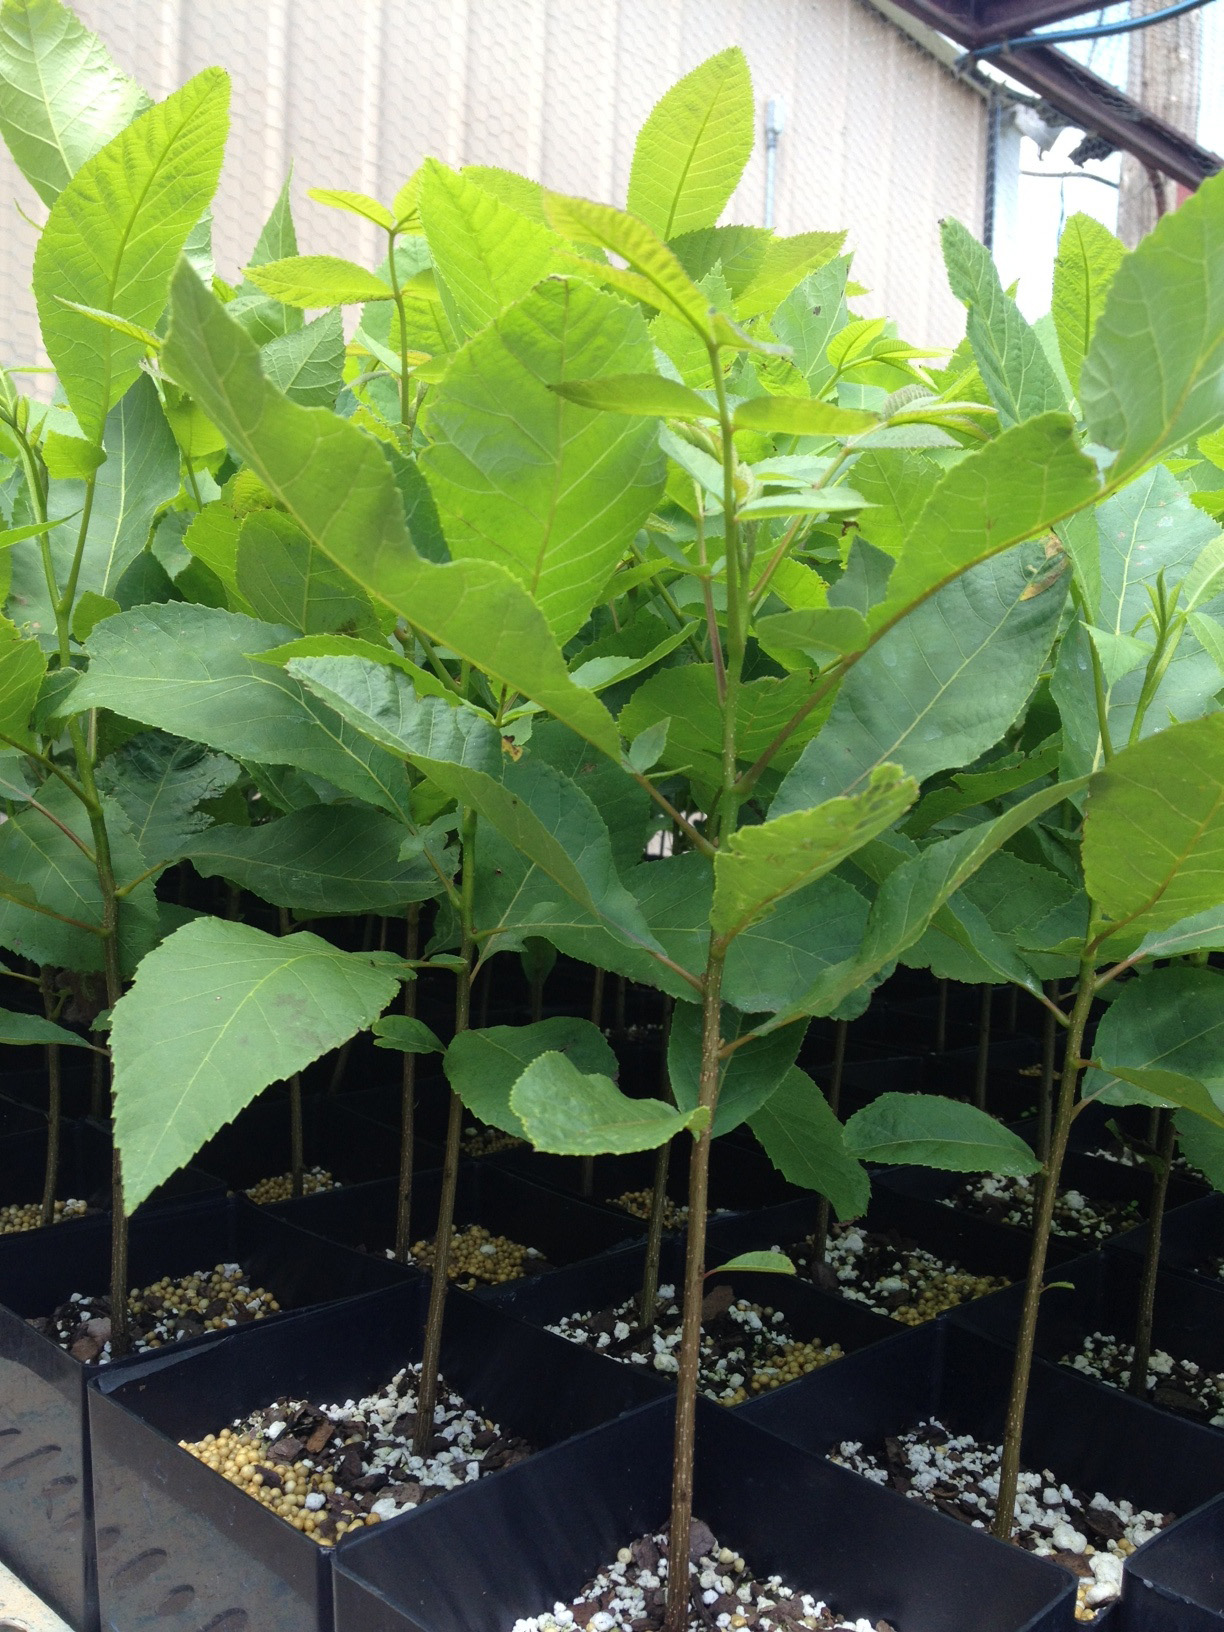 A gorup of seedling trees 